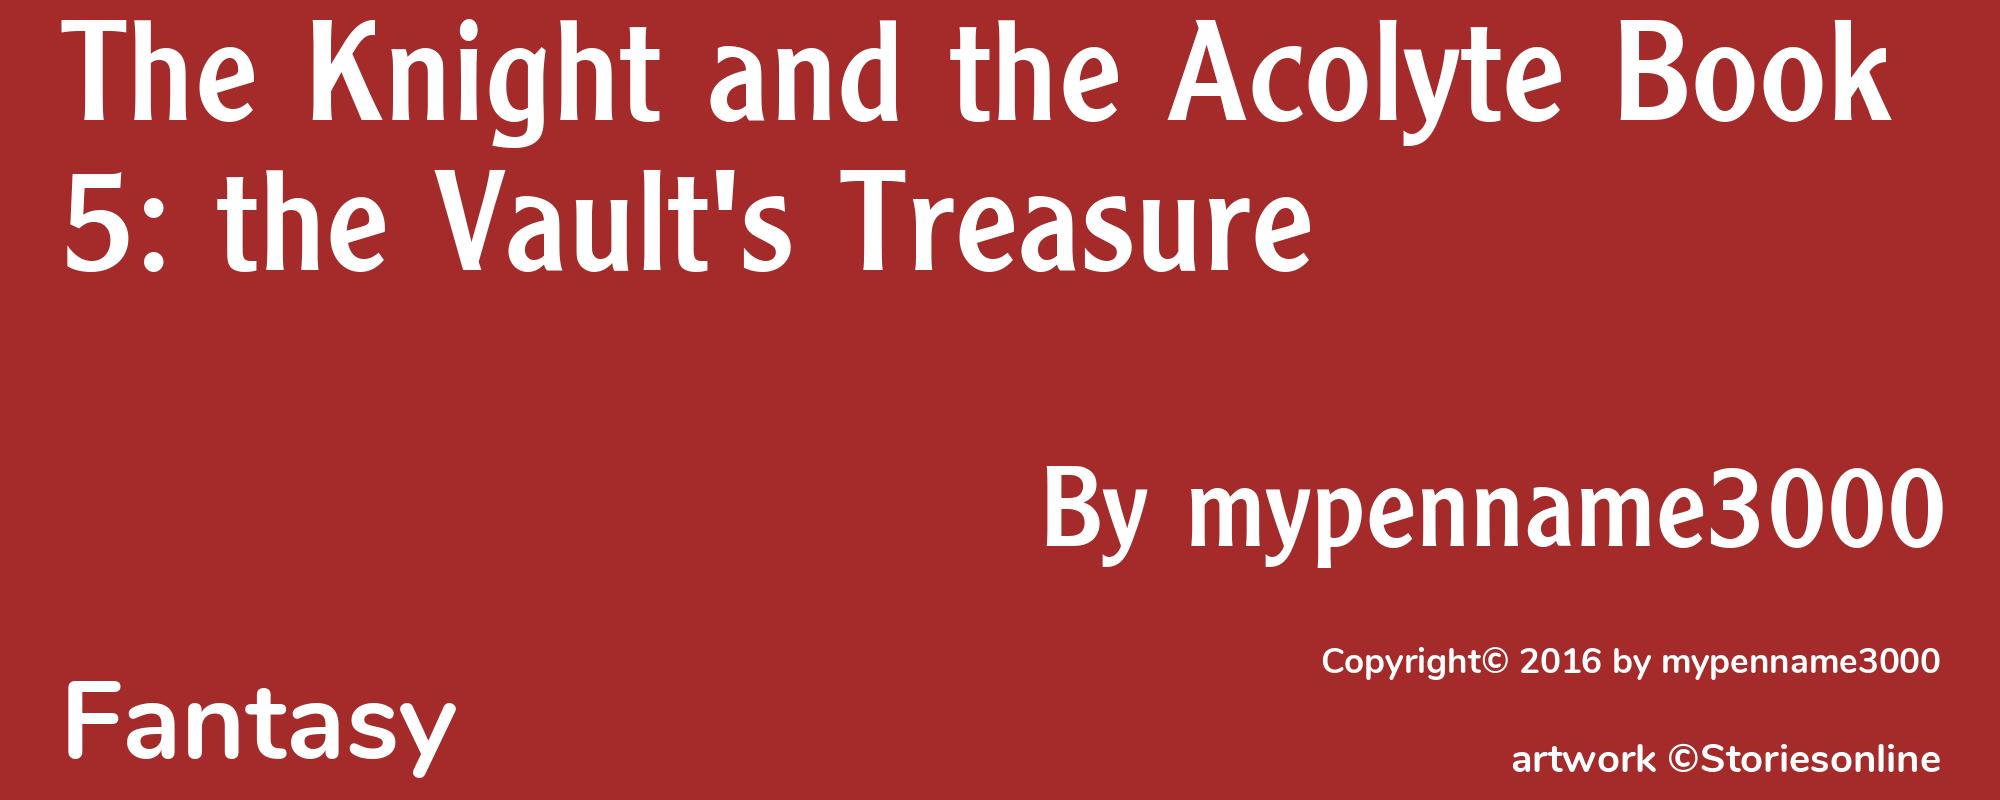 The Knight and the Acolyte Book 5: the Vault's Treasure - Cover